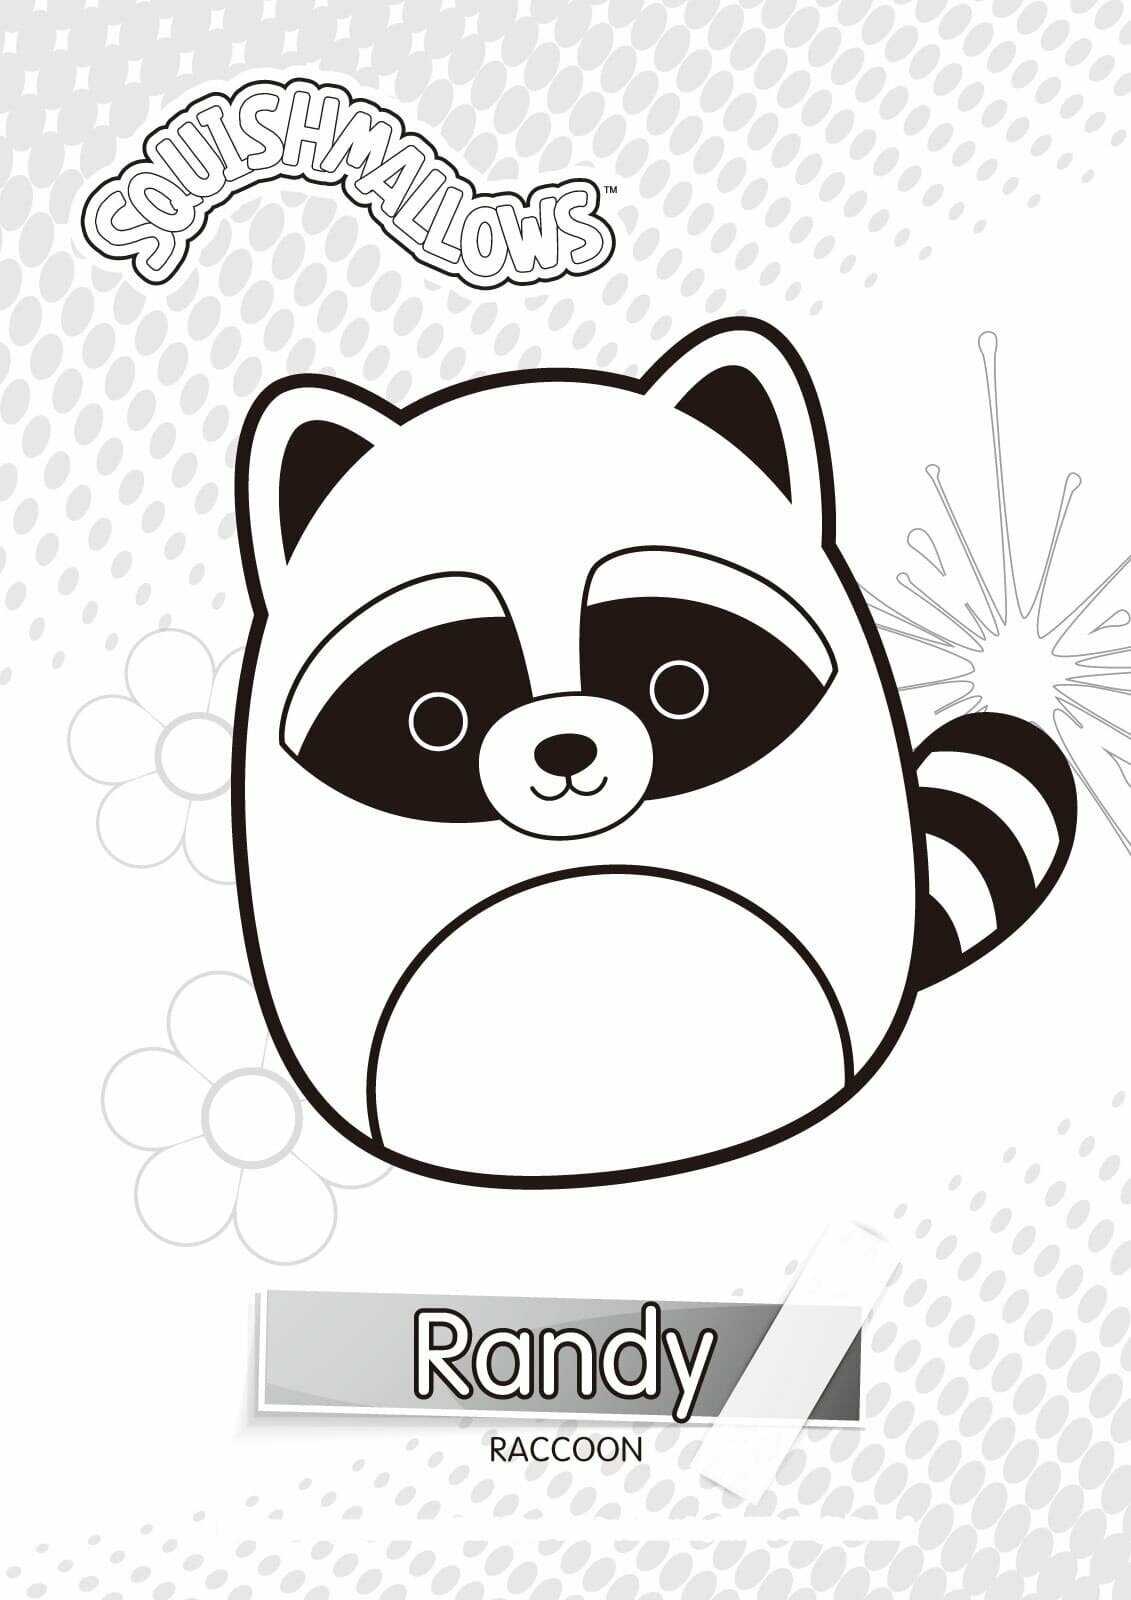 Randy the raccoon with black markings around his eyes from Squishmallow